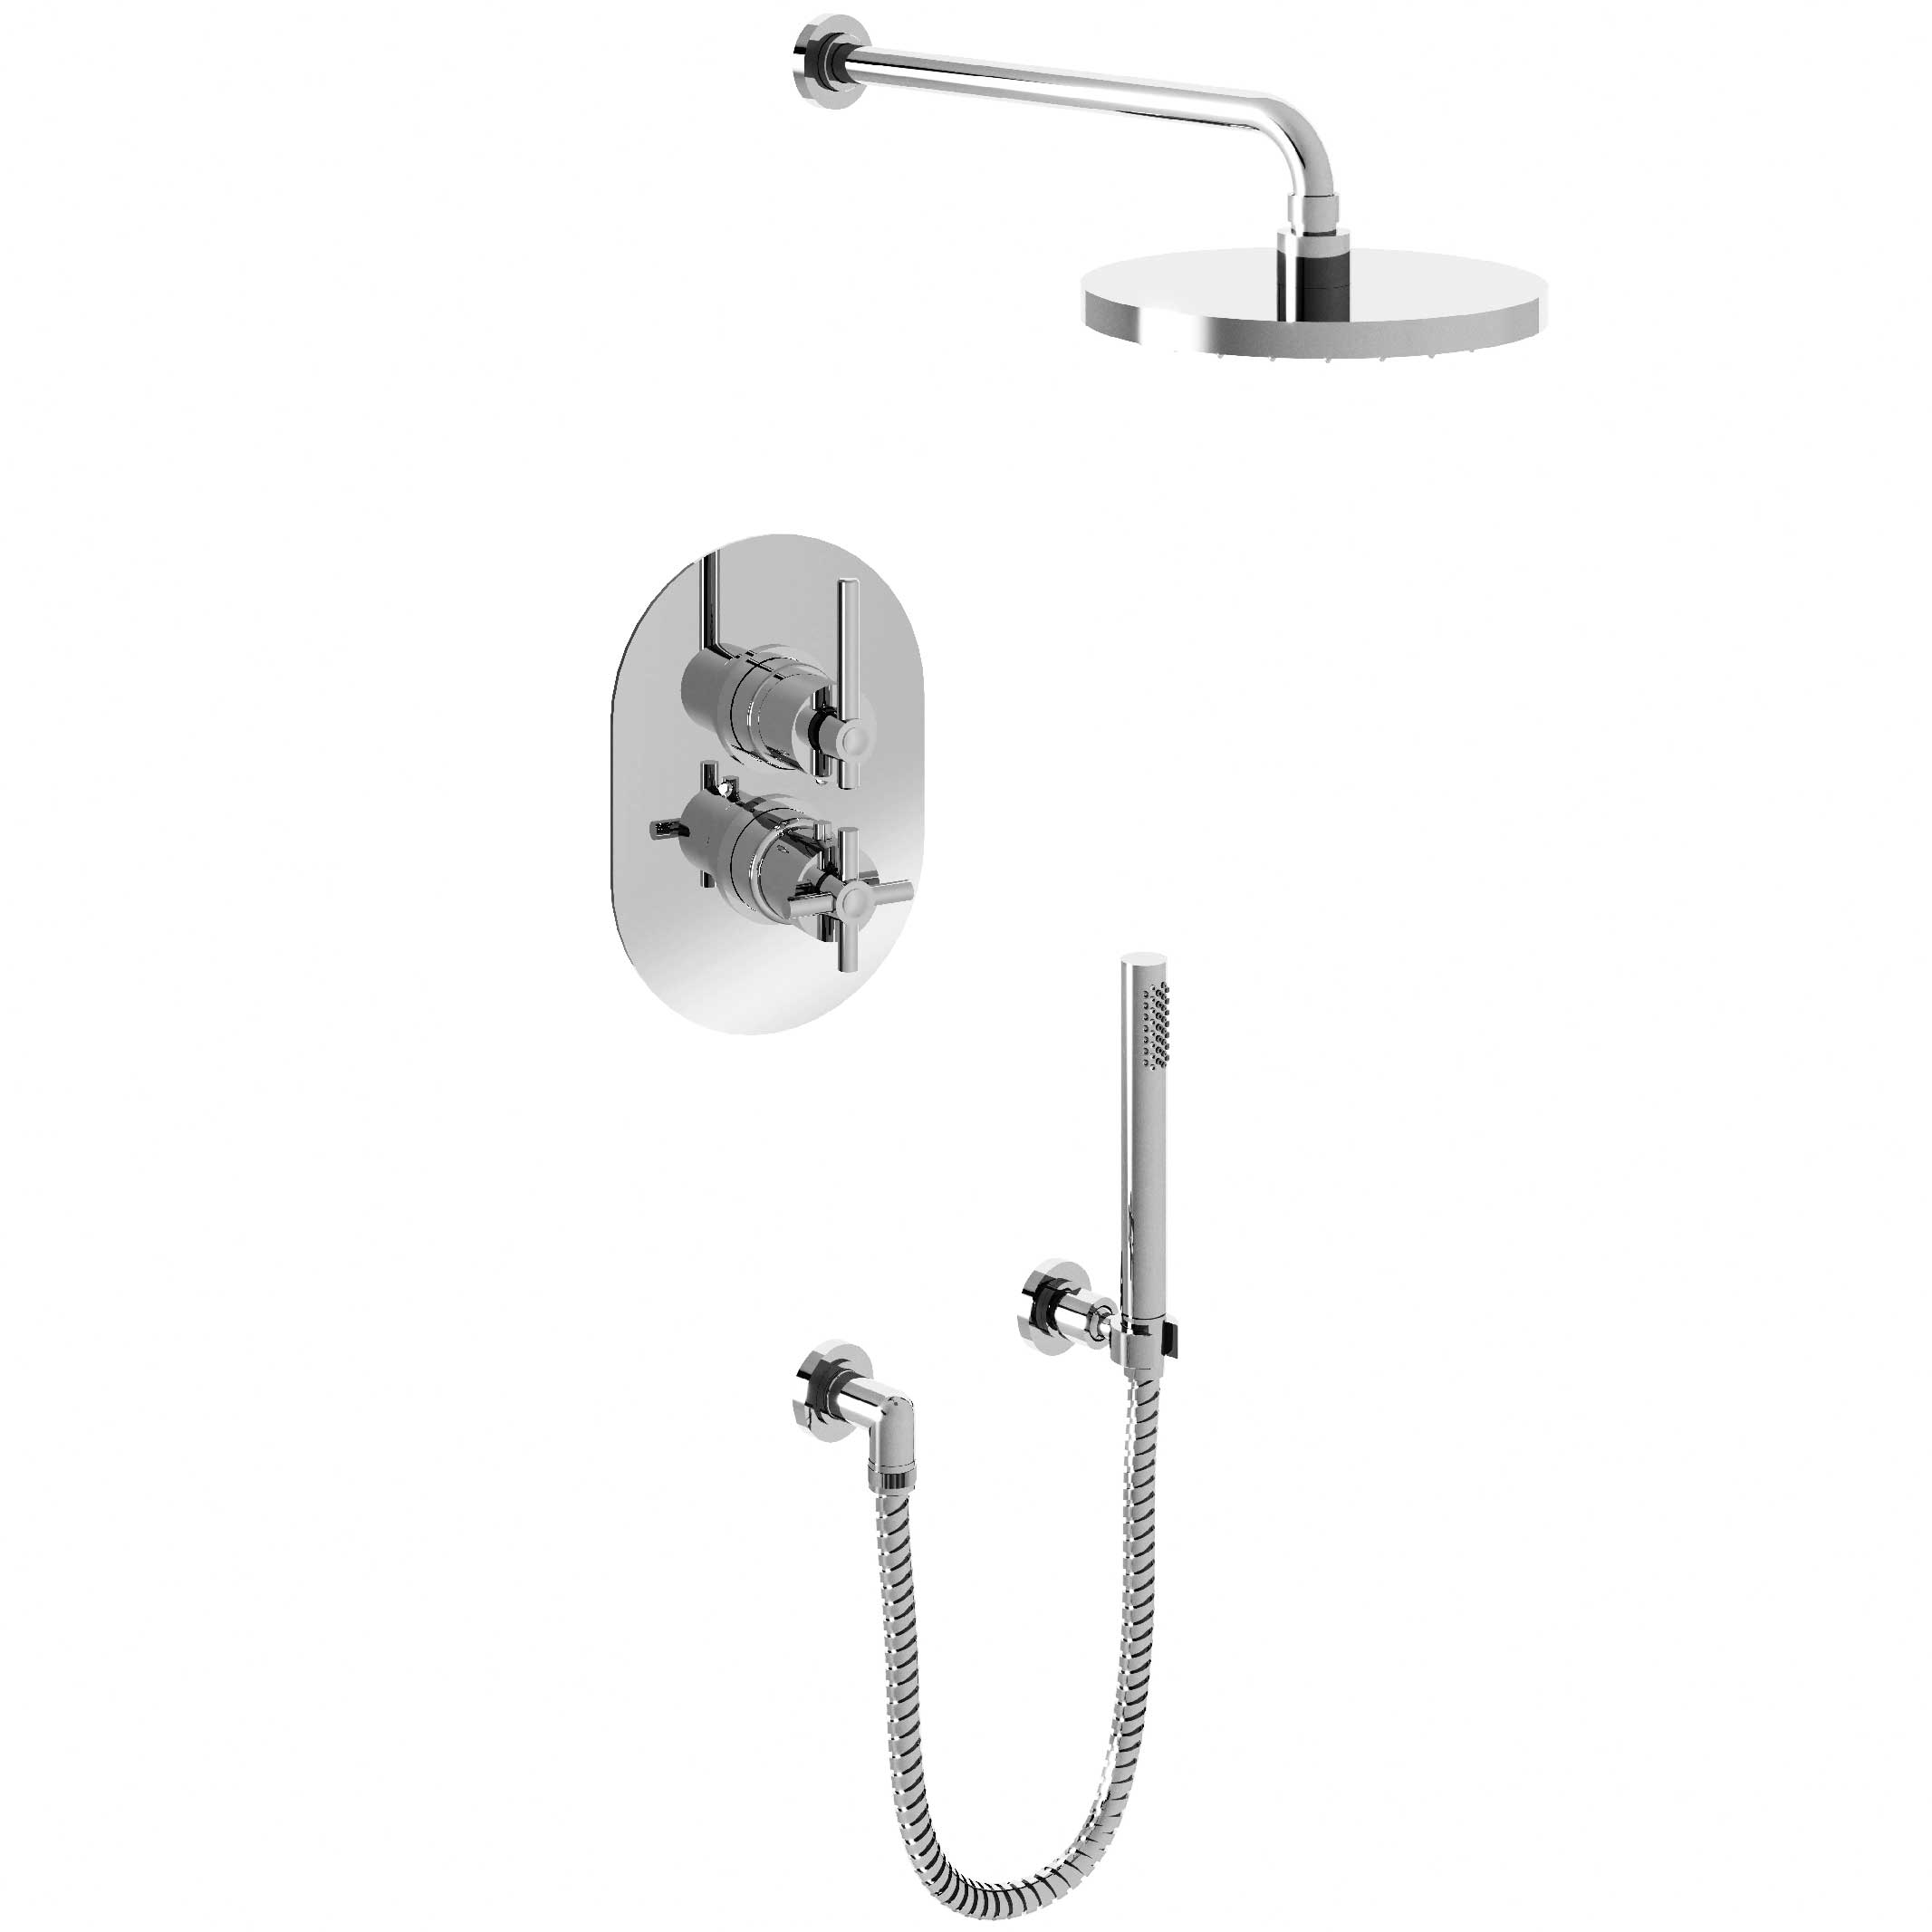 M91-2308T2 Thermostatic shower mixer package